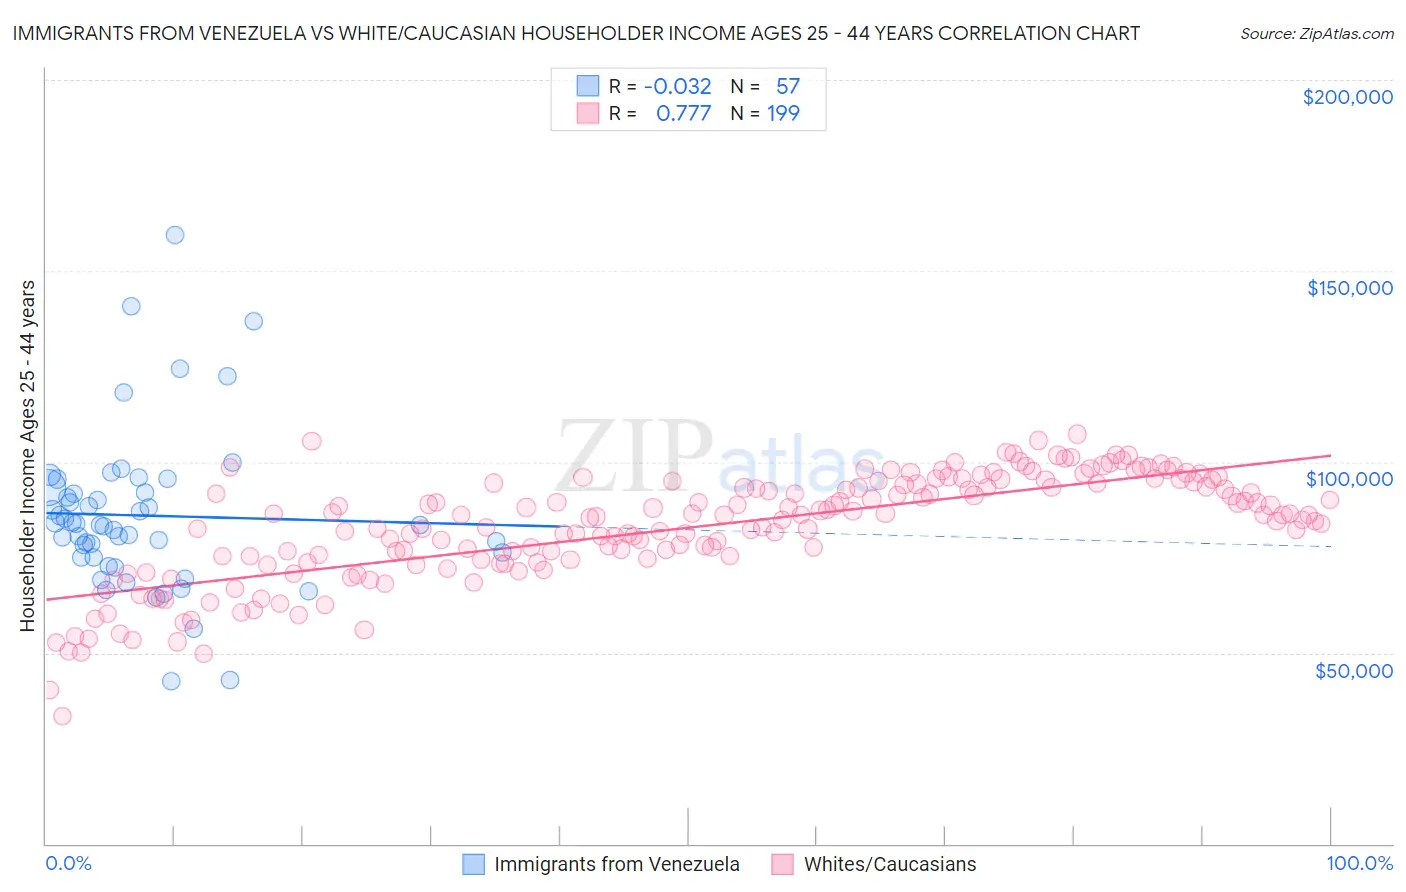 Immigrants from Venezuela vs White/Caucasian Householder Income Ages 25 - 44 years